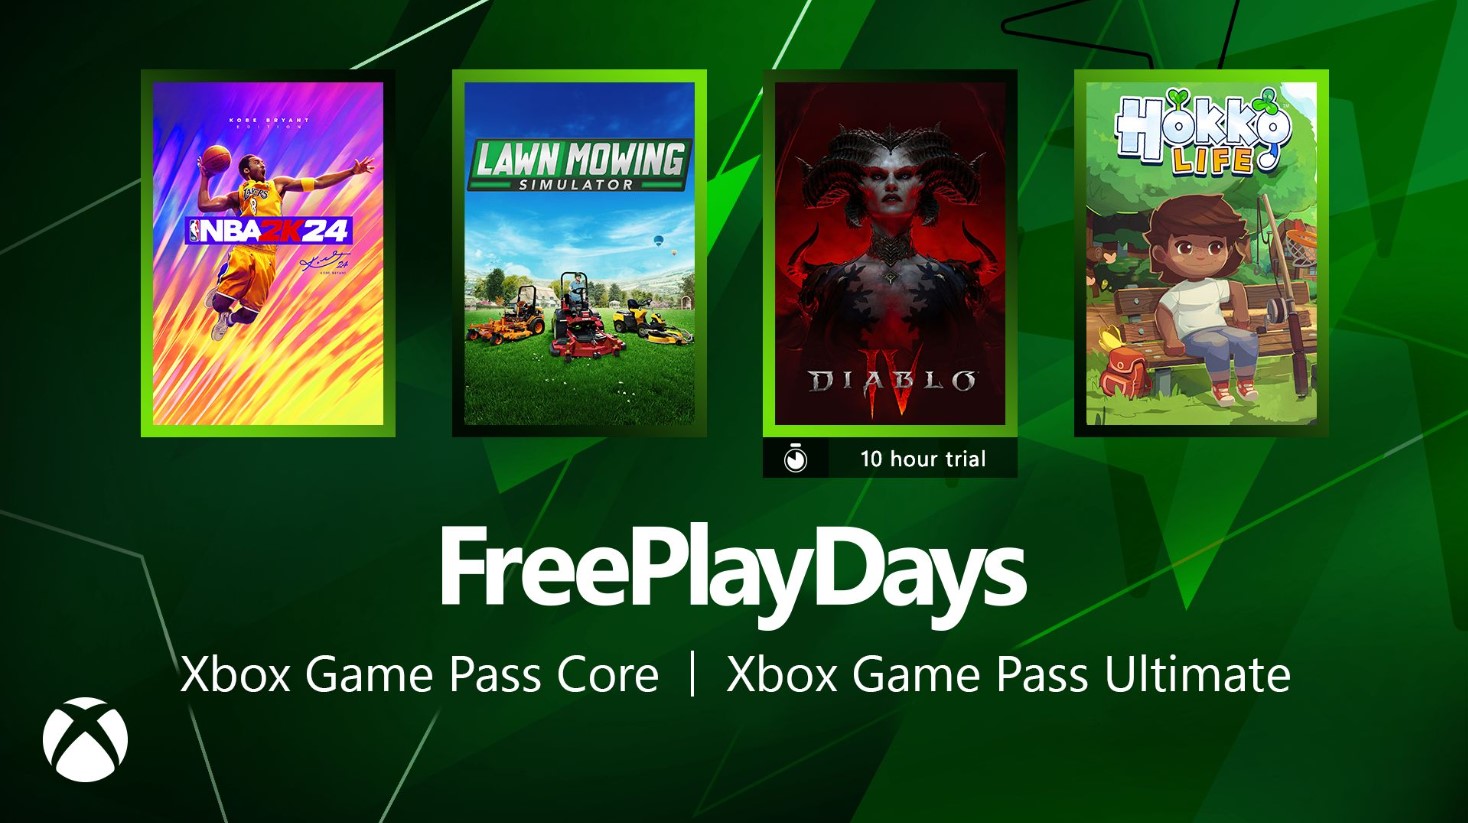 Xbox Free Play Days Announced For This Weekend. Offer Ends October 22